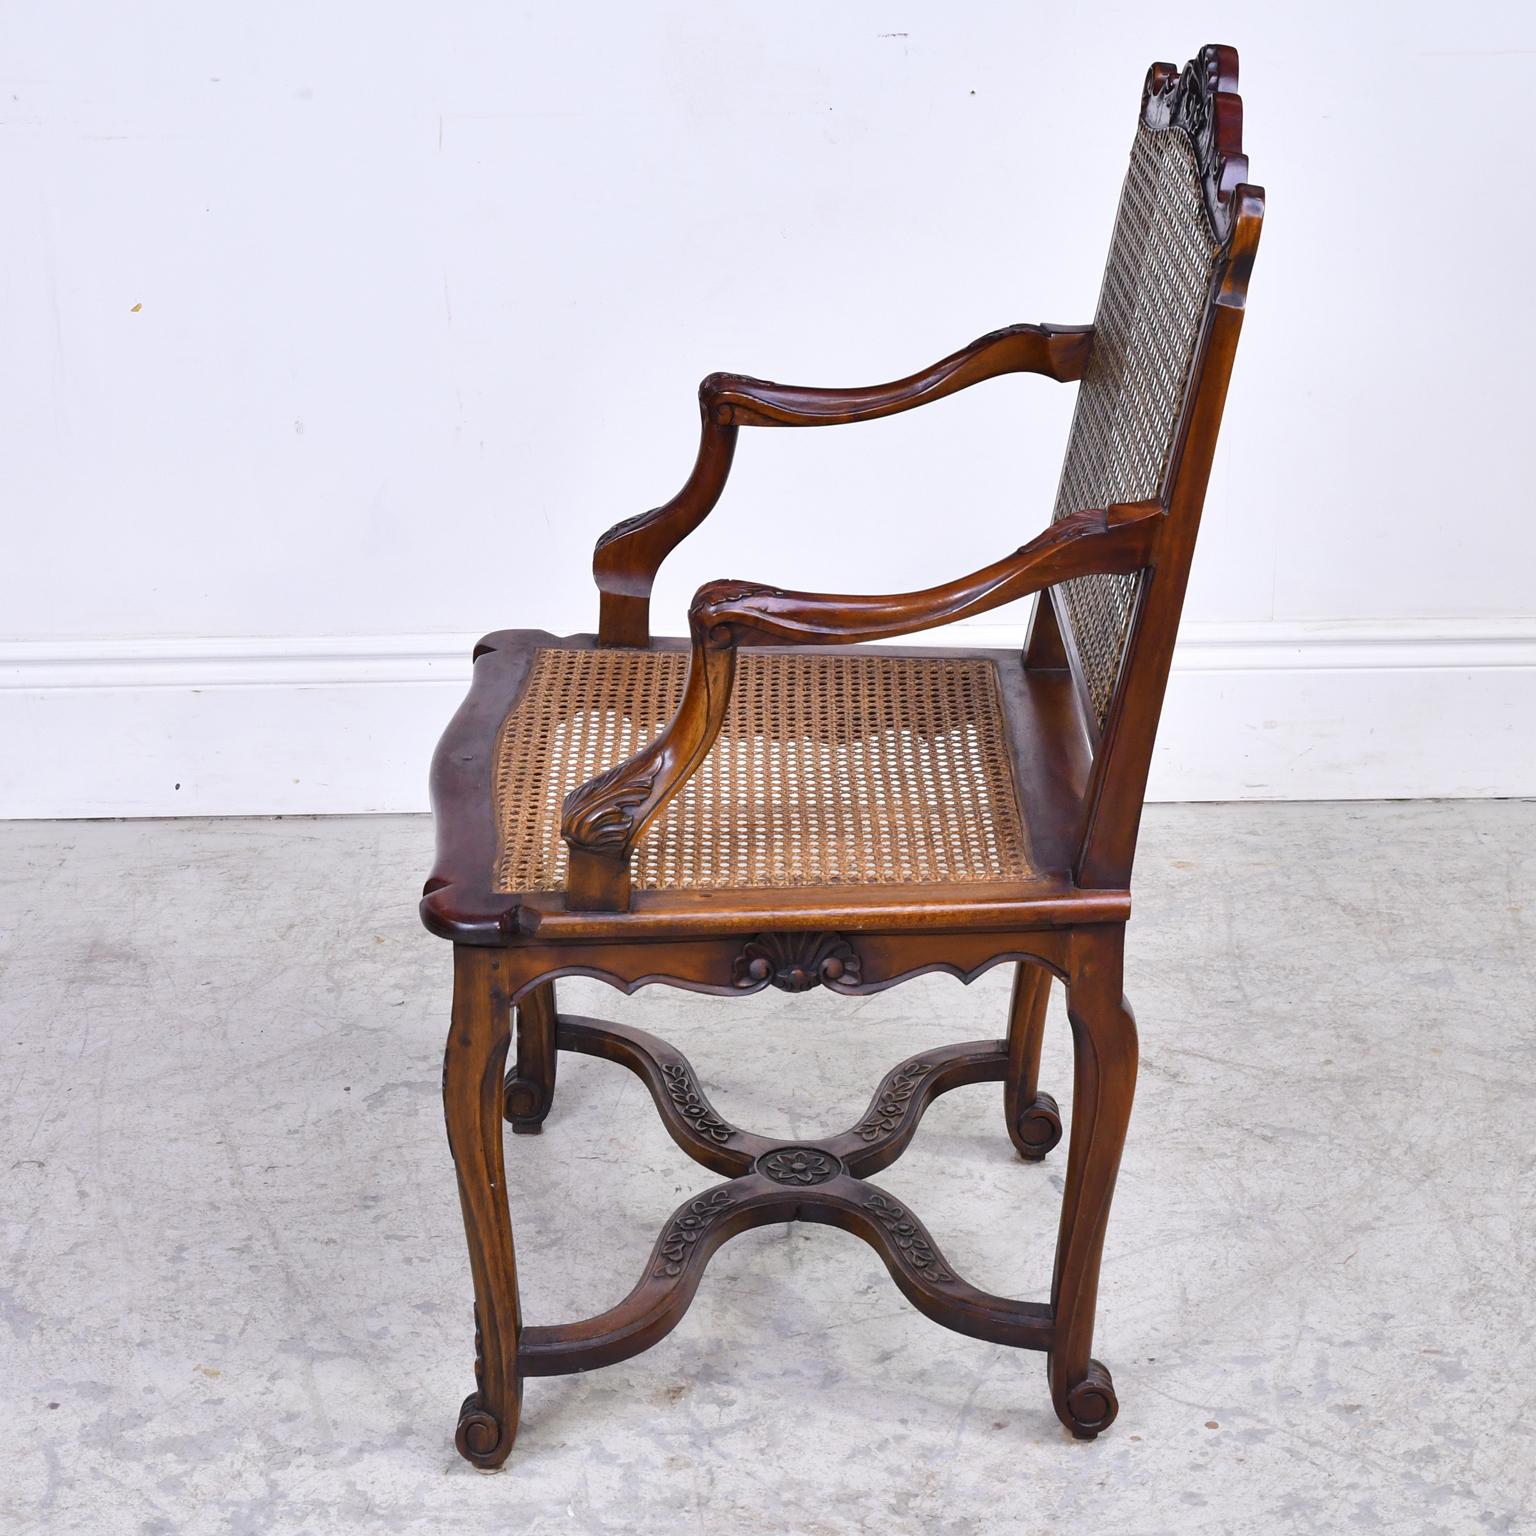 Carved Set of 10 LXVI Chairs with Pair of Arms and 8 Side Chairs, Caned Seat and Back